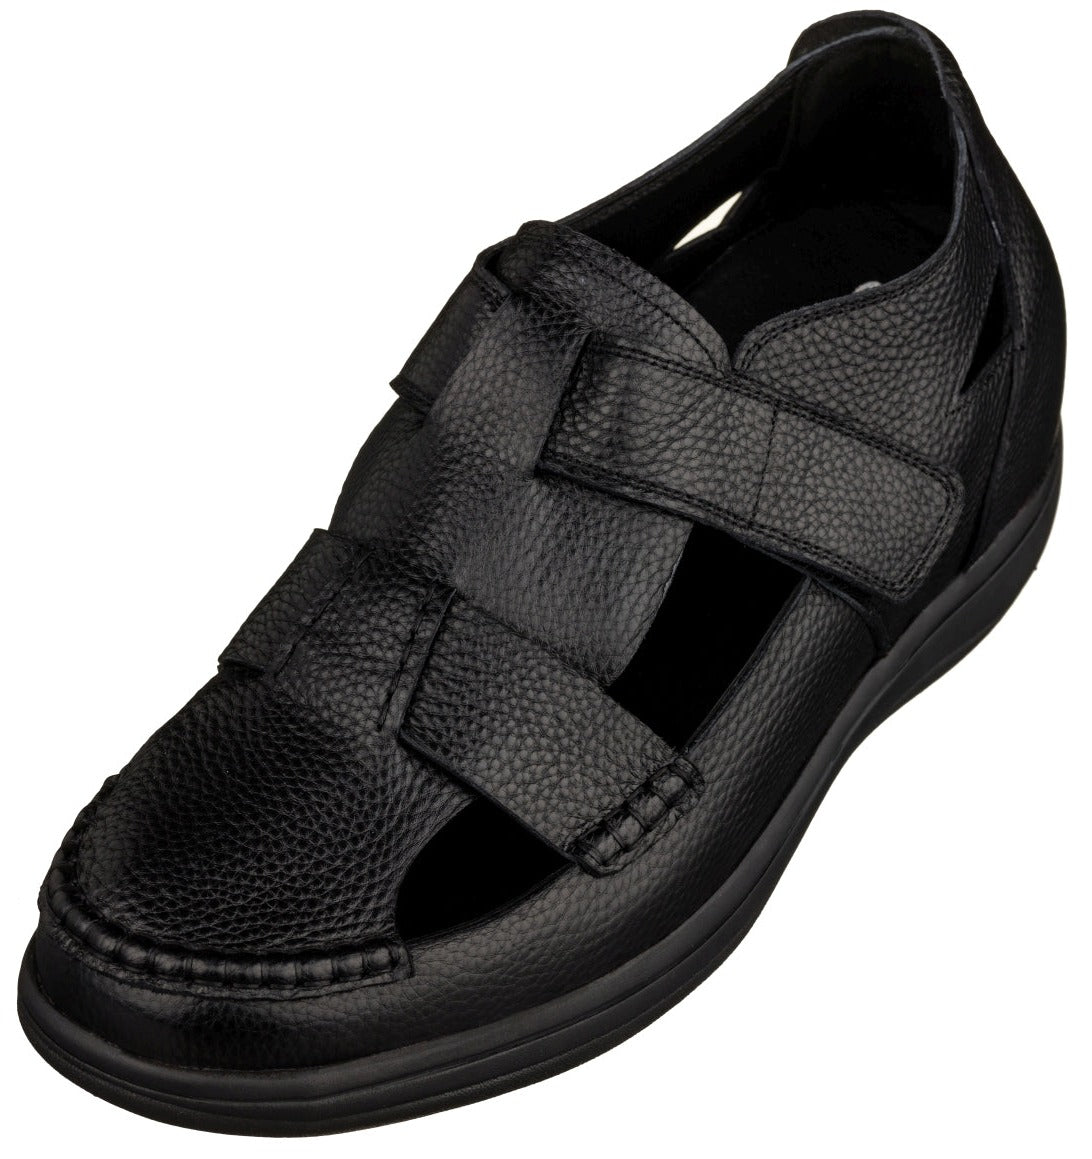 Elevator shoes height increase CALTO - K2661 - 3.2 Inches Taller (Black) - Casual Fisherman Sandal